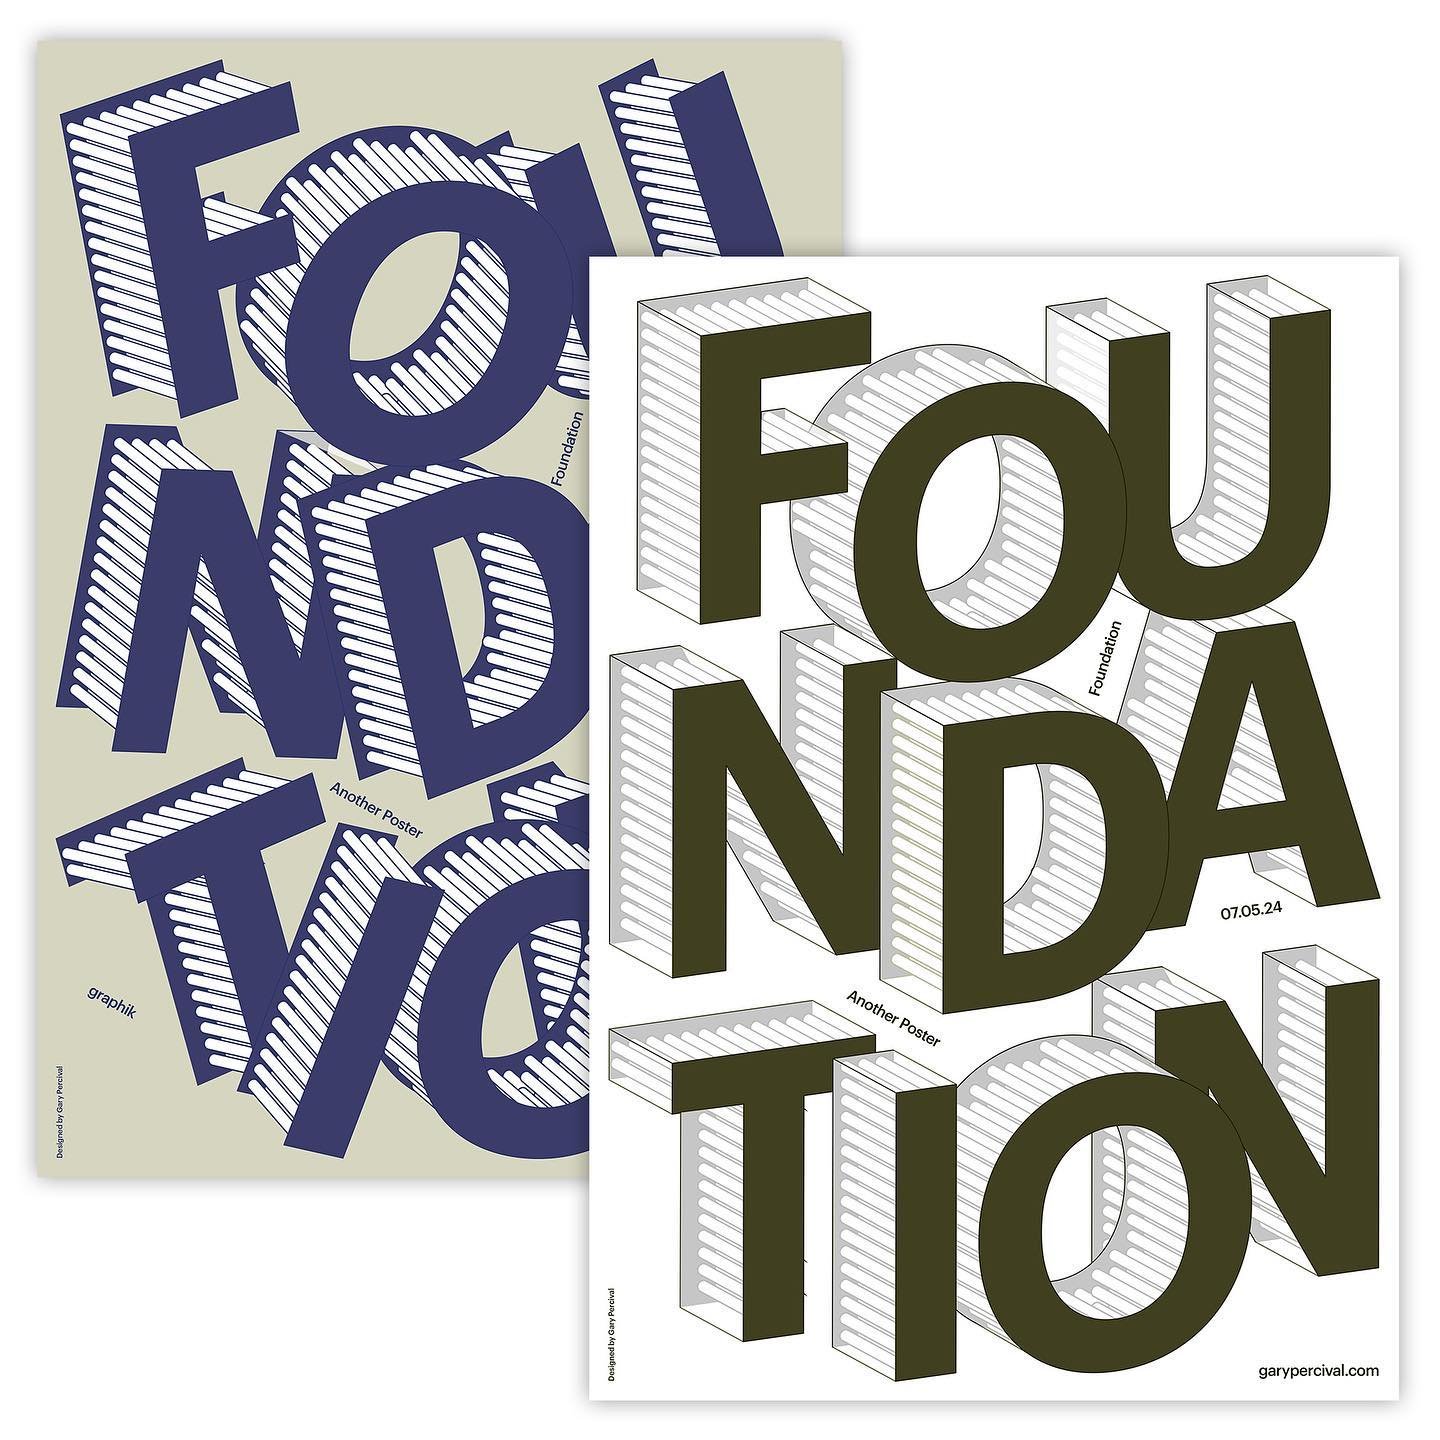 Foundation(s).

Which version do you prefer?

✈️ Enjoy FREE shipping on all prints!
🔗 Link in bio to shop now.
💌 Don&rsquo;t forget to sign up for my newsletter, where I share what I have learned as a freelance designer.